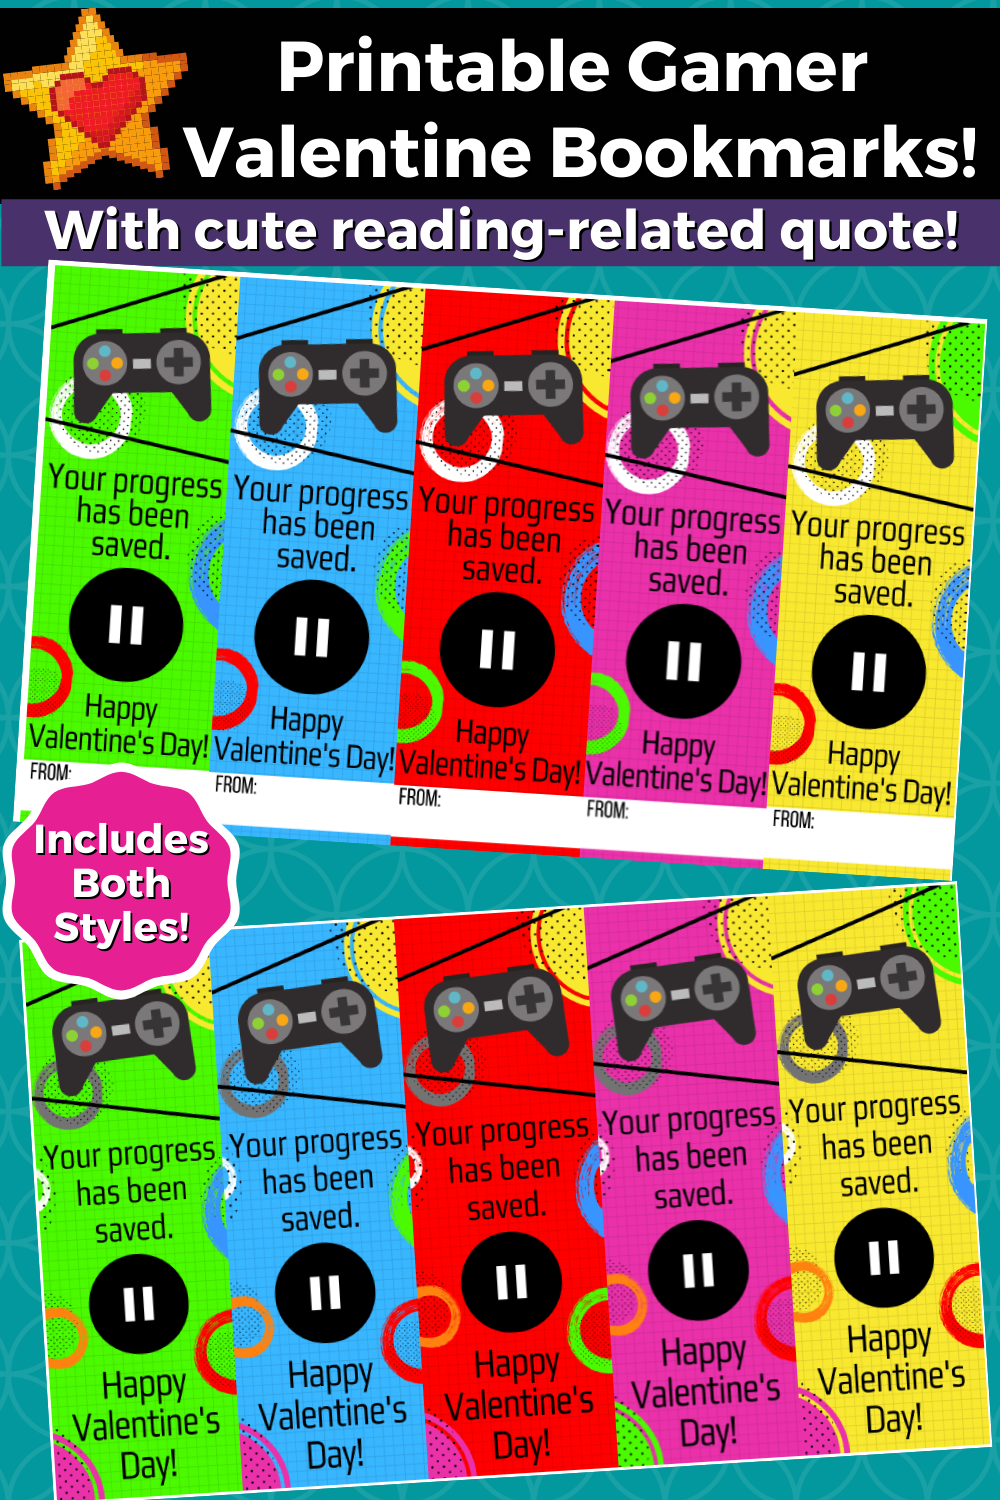 5 Printable Gamer Themed Valentine Bookmarks for Kids- 2 Styles Included!